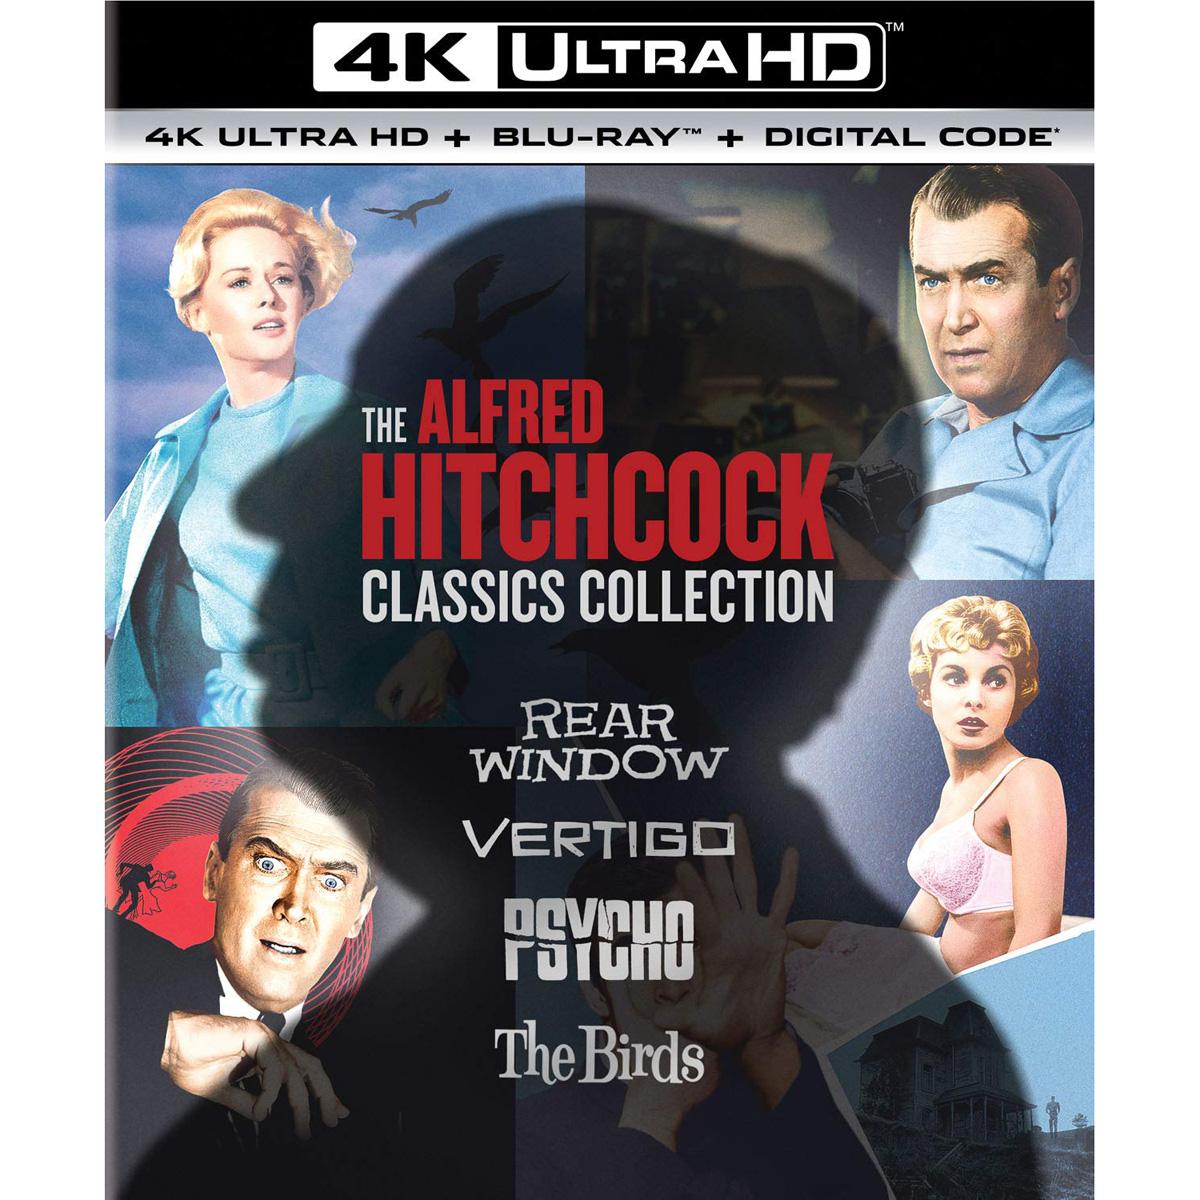 The Alfred Hitchcock Classics Collection Volume 2 Blu-ray for $31.99 Shipped